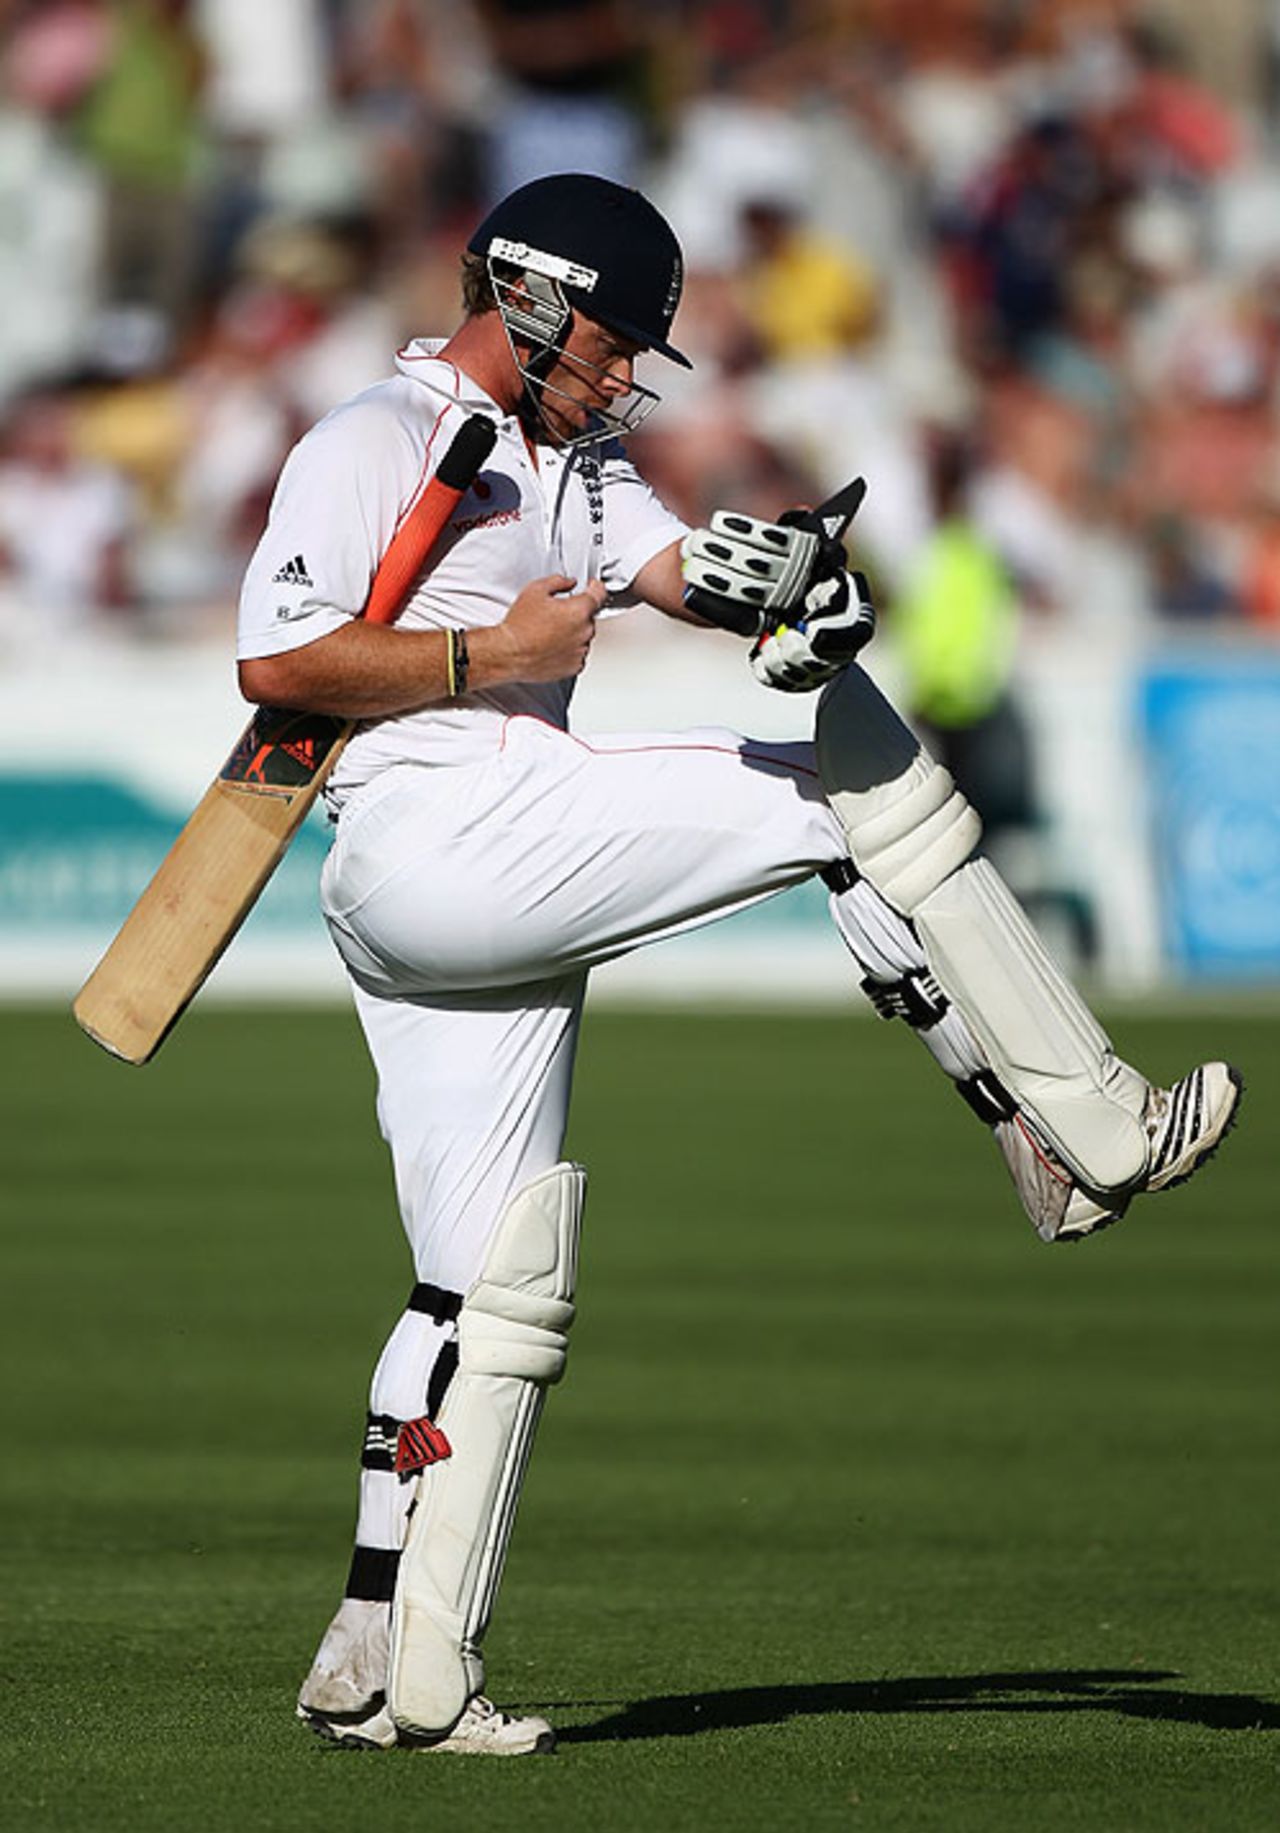 Ian Bell kicks his bat in frustration after falling for 78, England v South Africa, 3rd Test, Cape Town, January 7, 2010